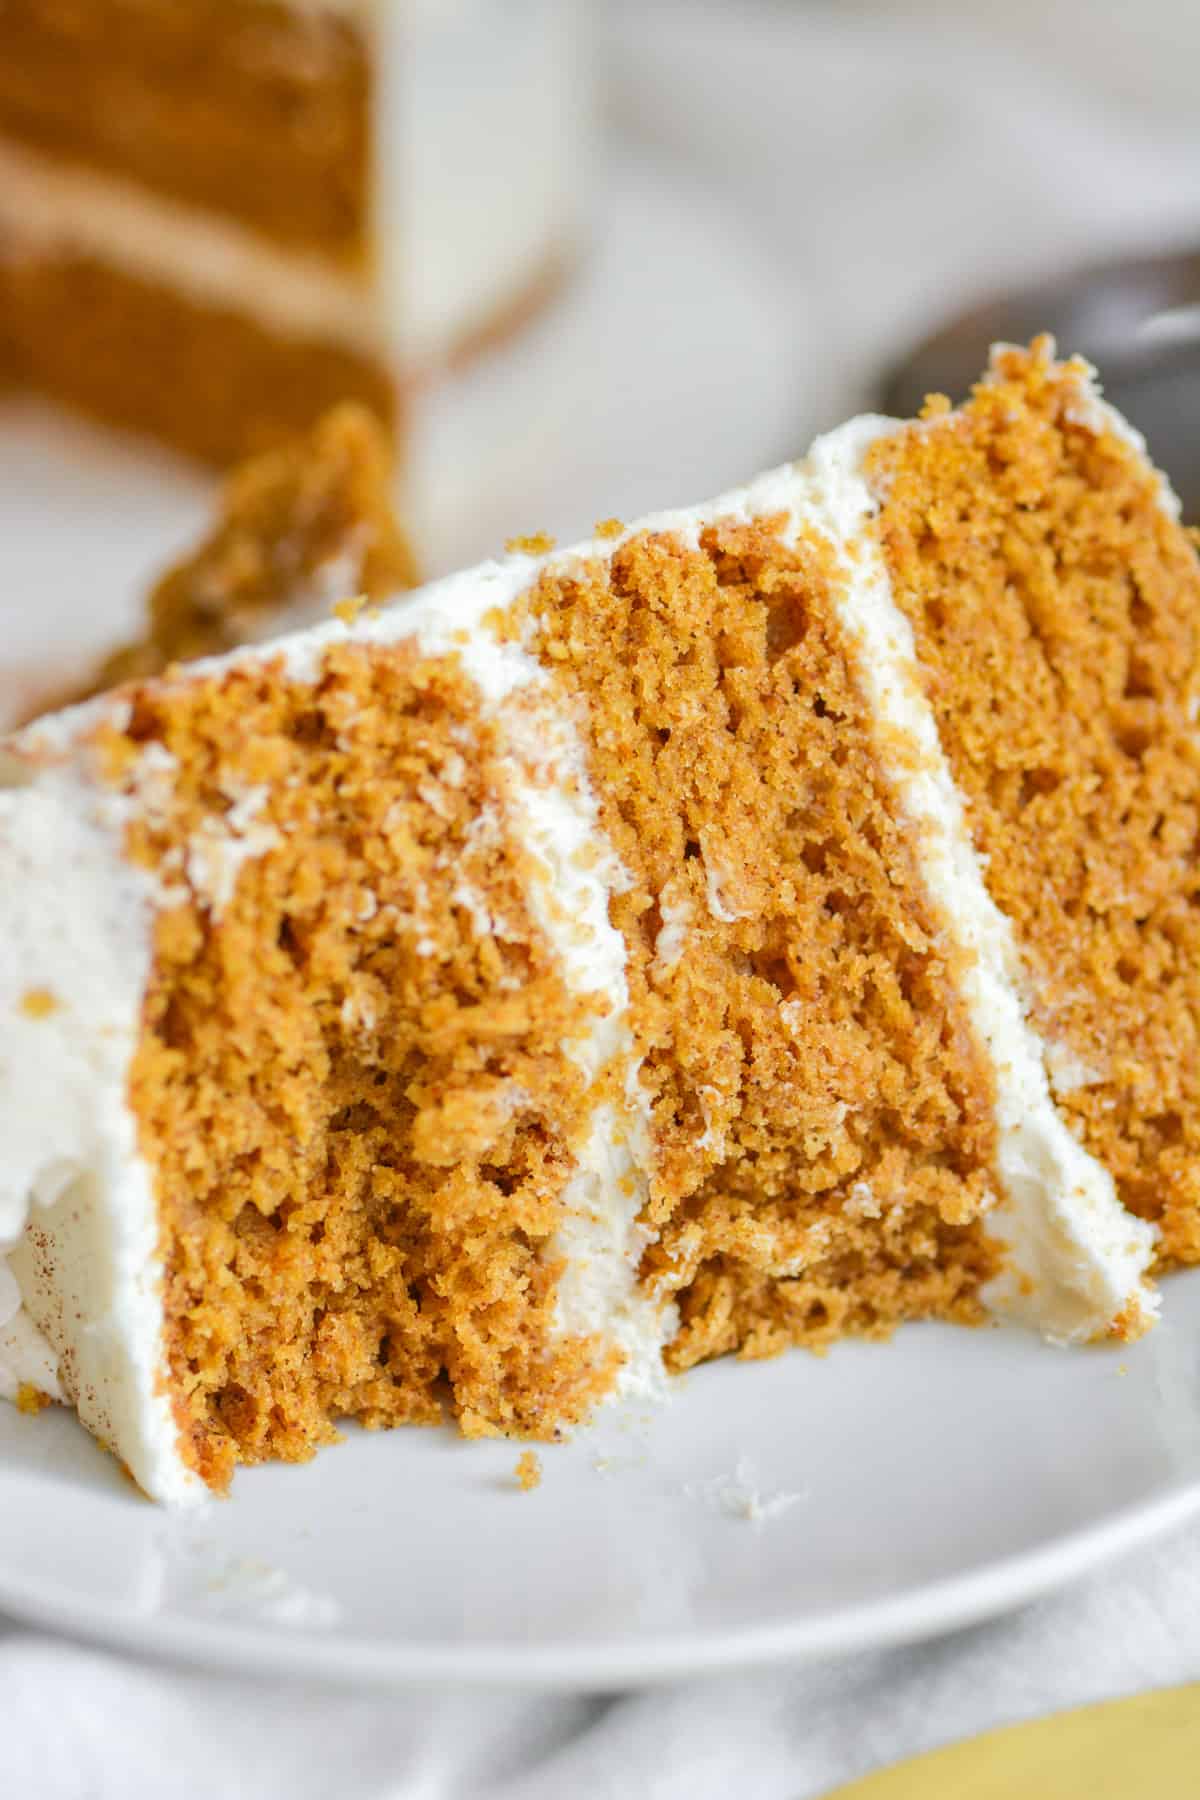 A bite taken out of the vegan and eggless pumpkin spice layer cake.